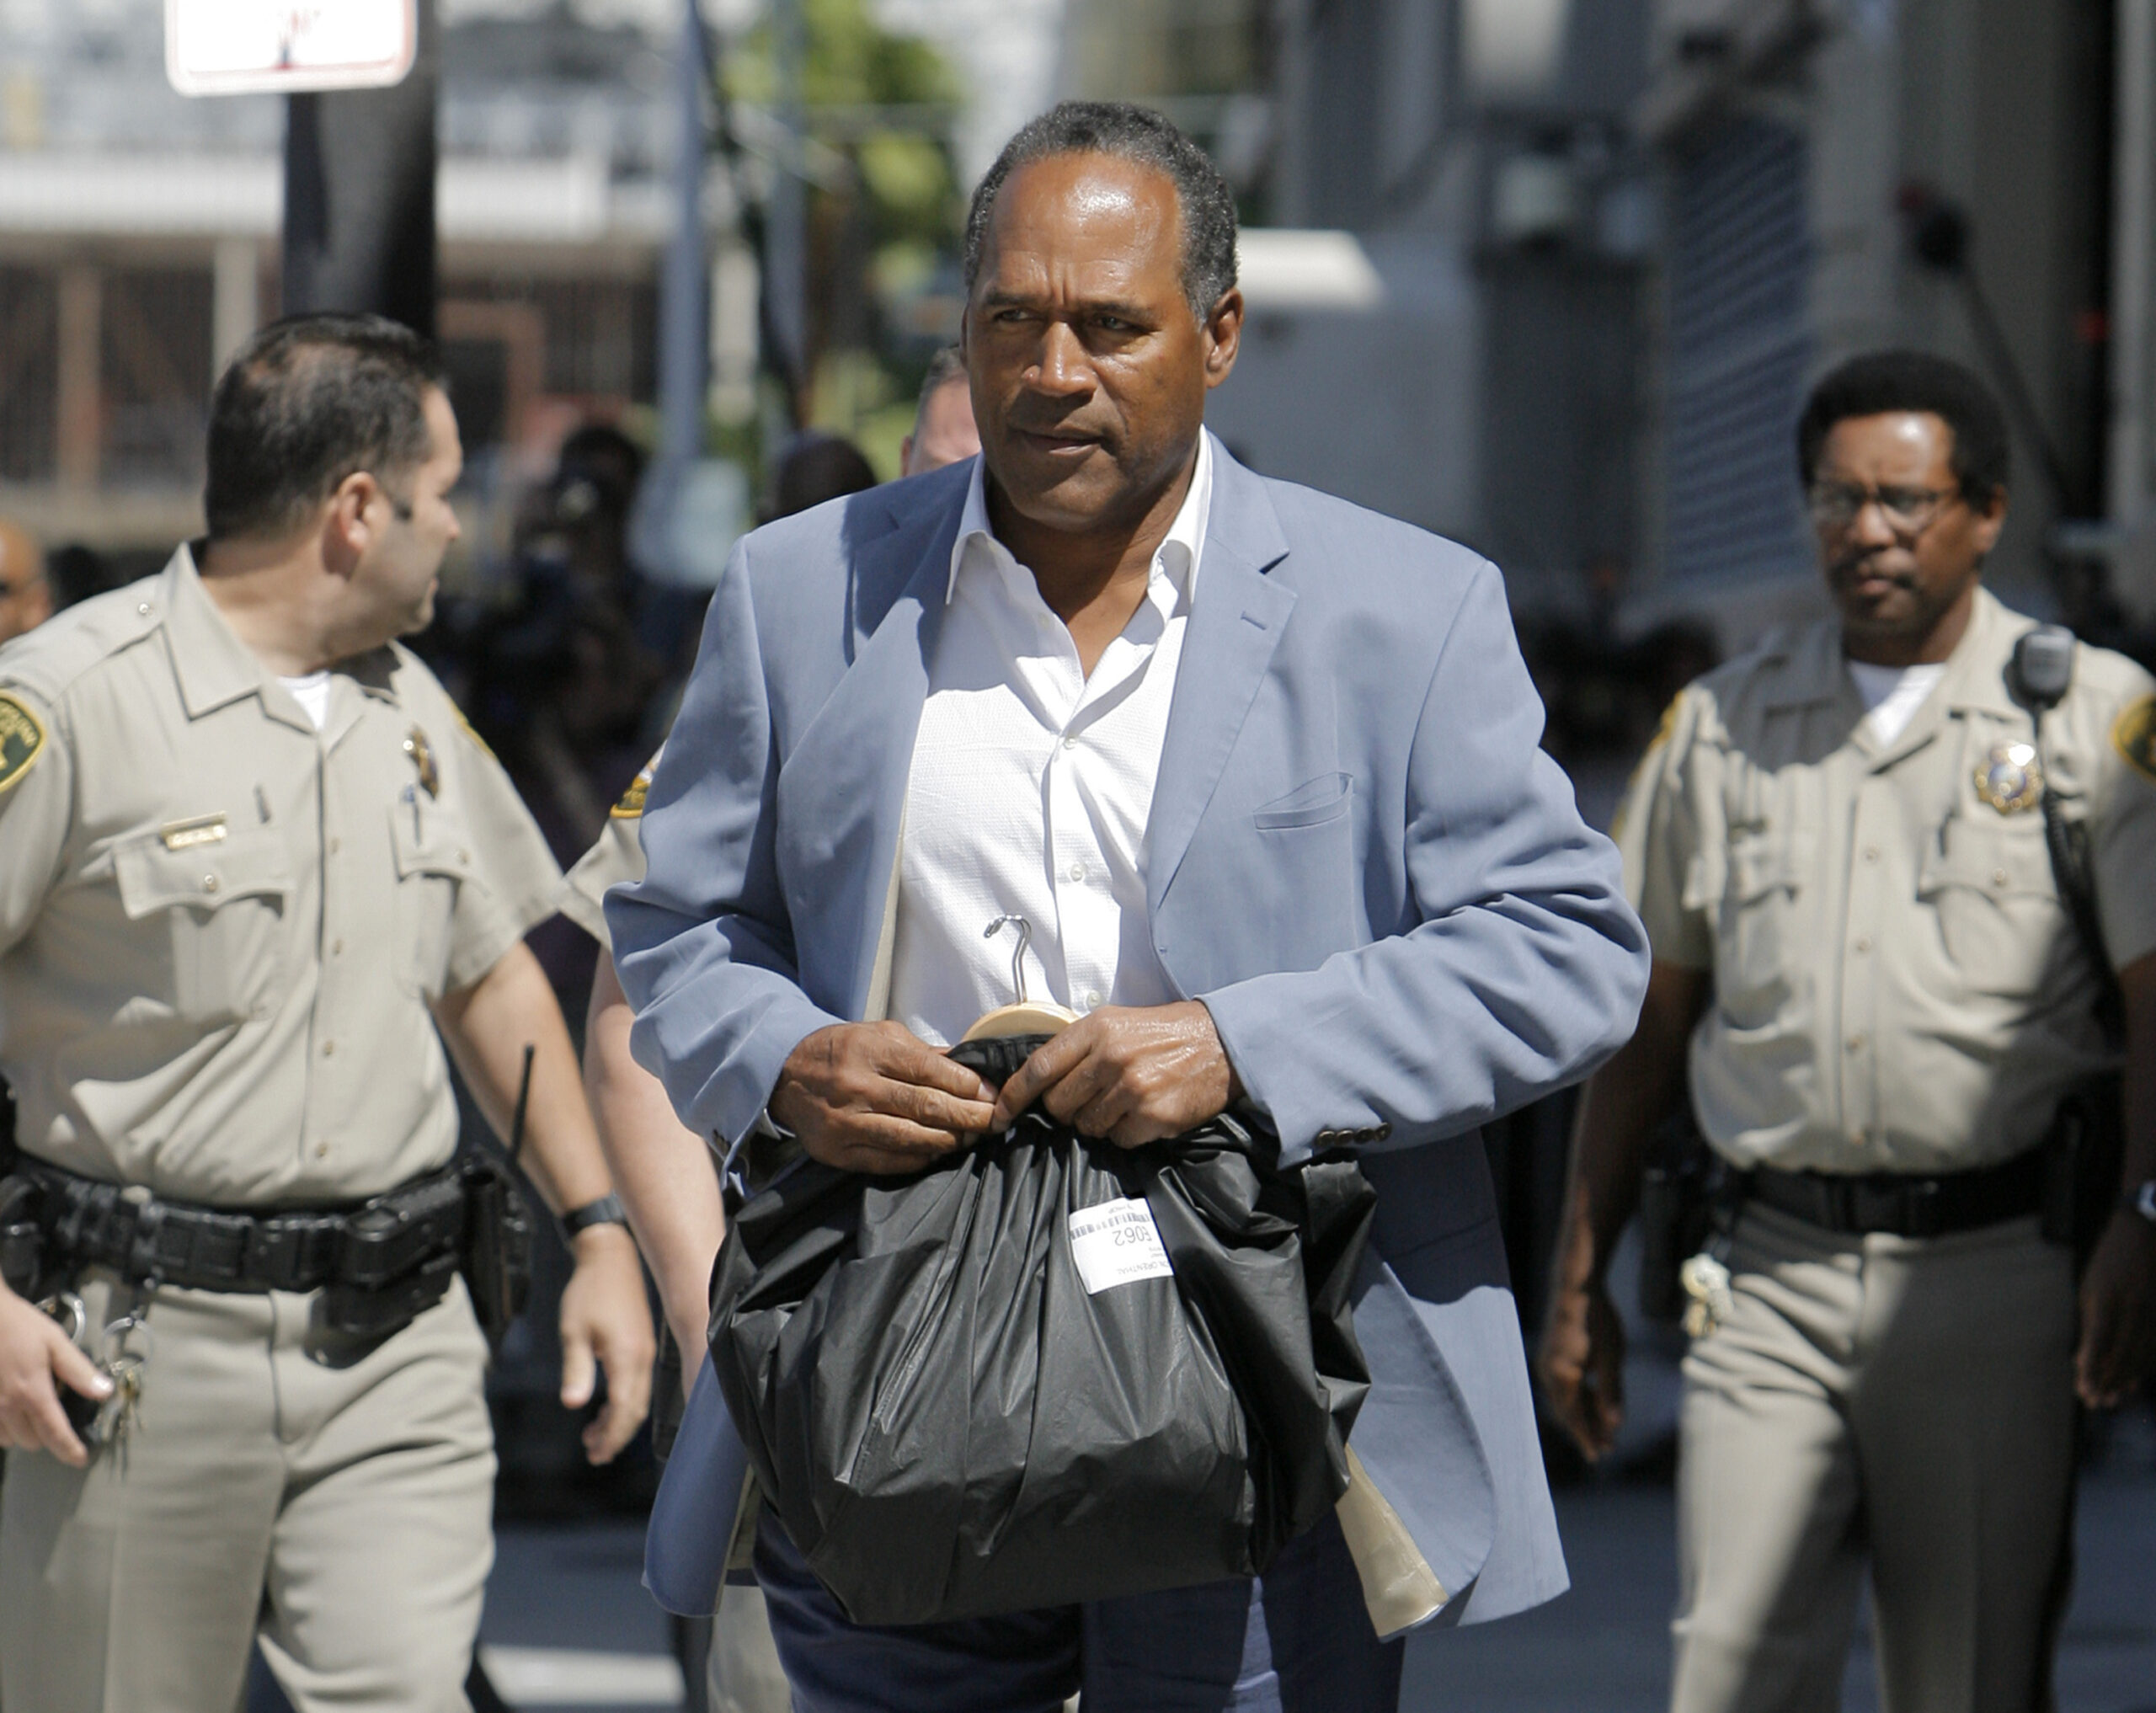 Reports indicate that O.J. Simpson has died at the age of 76 of cancer. Here, Simpson is seen as he leaves the Clark County Detention Center after he was granted bail in Las Vegas, Wednesday, Sept. 19, 2007. Simpson was released from jail Wednesday after posting $125,000 bail in connection with the armed robbery of sports memorabilia collectors at a Las Vegas hotel. Simpson, wearing a light blue sport coat and dark blue pants, carried a black bag as he strolled to a gray sedan with his lawyer and drove away from the Clark County Detention Center. Photo credit: Jae C. Hong, The Associated Press